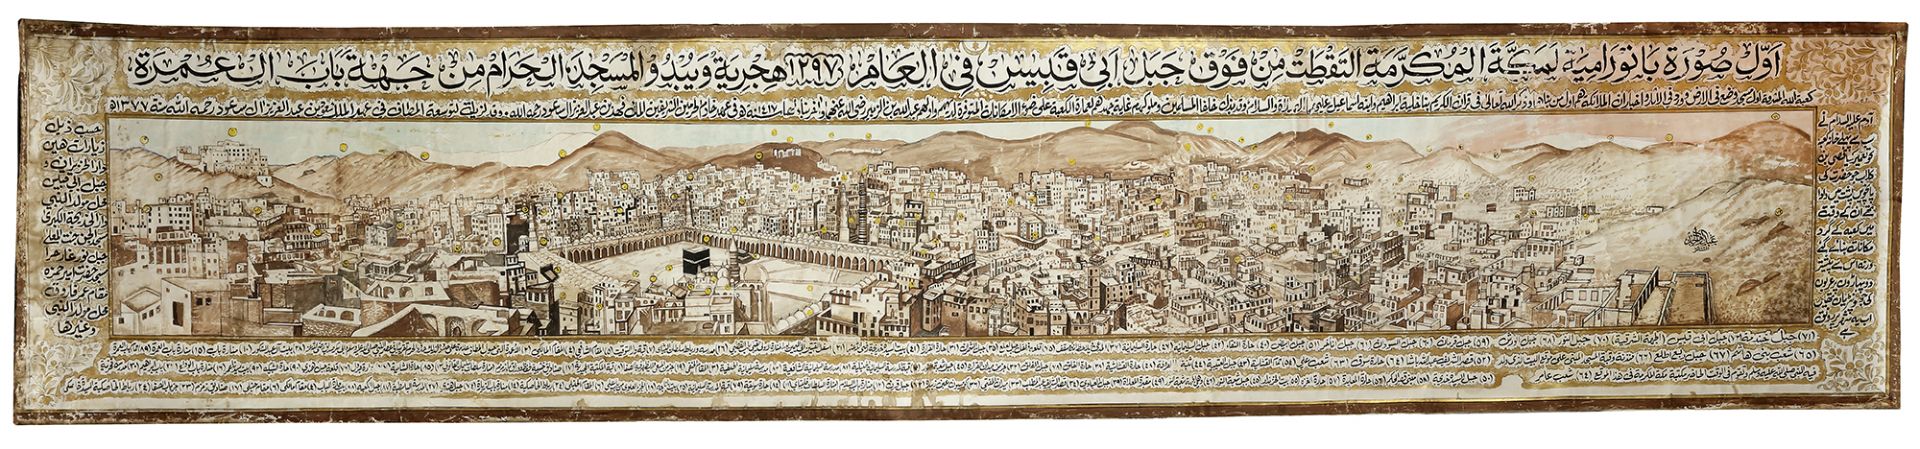 A LARGE ROLL DEPICTING A PANORAMA VIEW OF MECCA, DATED 1417 AH/1996 AD - Image 2 of 3